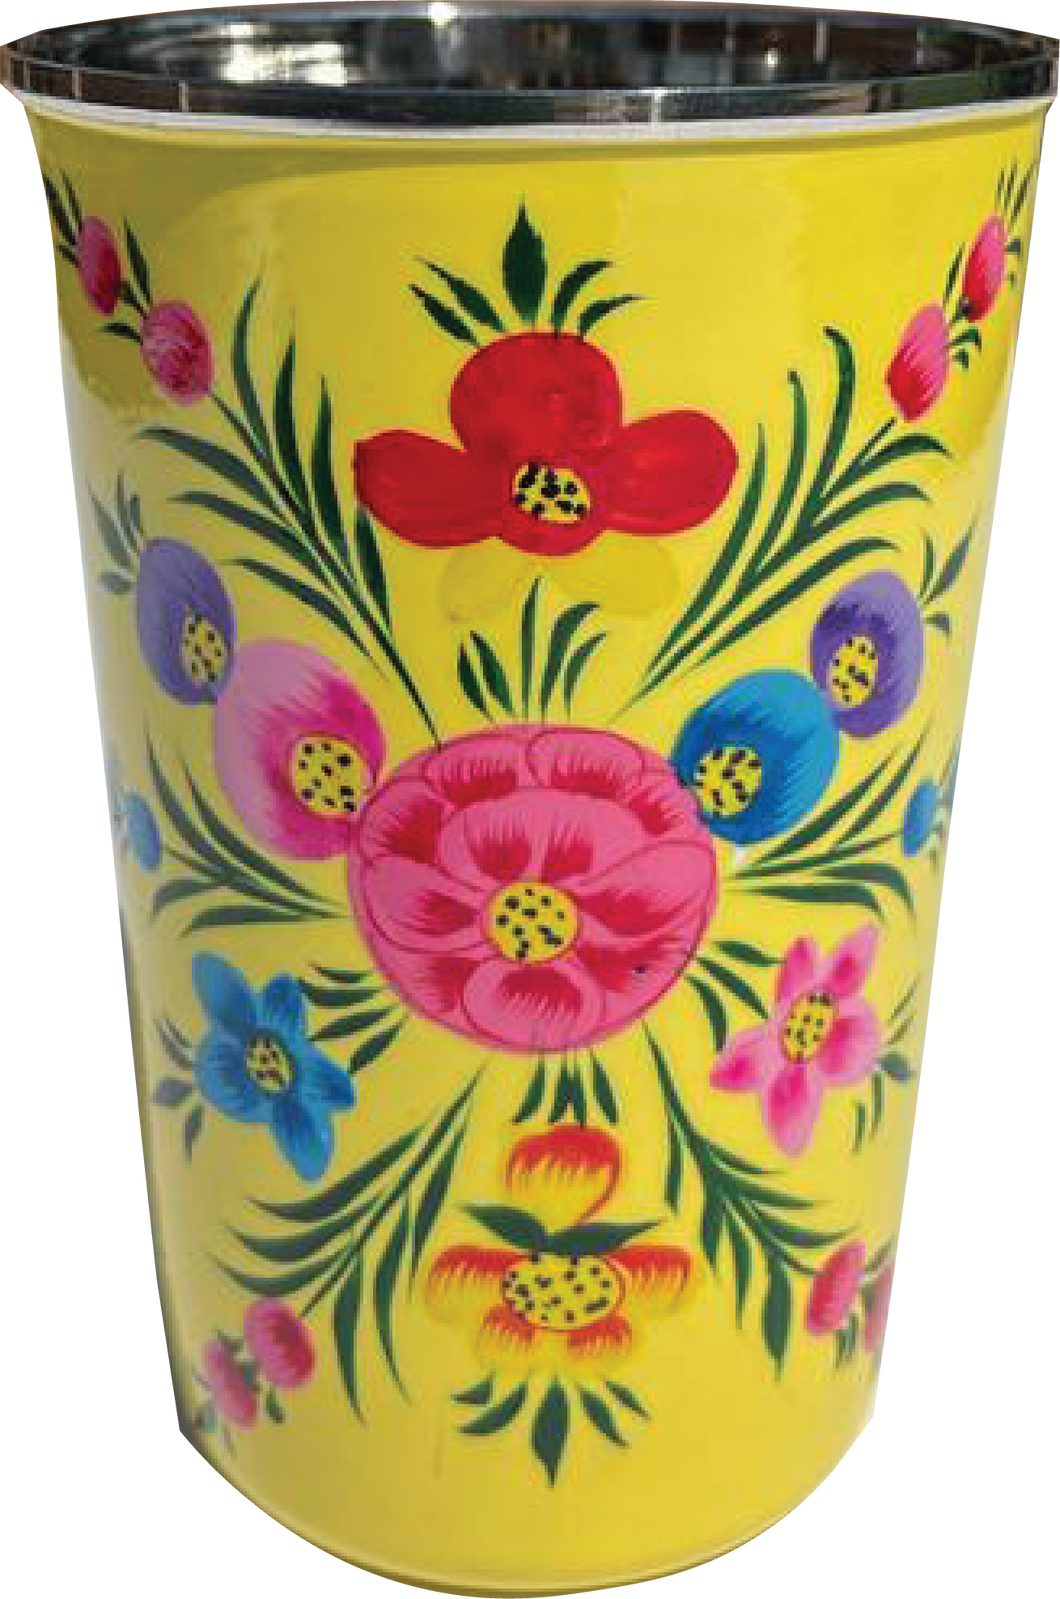 Hand painted floral design stainless steel tumbler in yellow